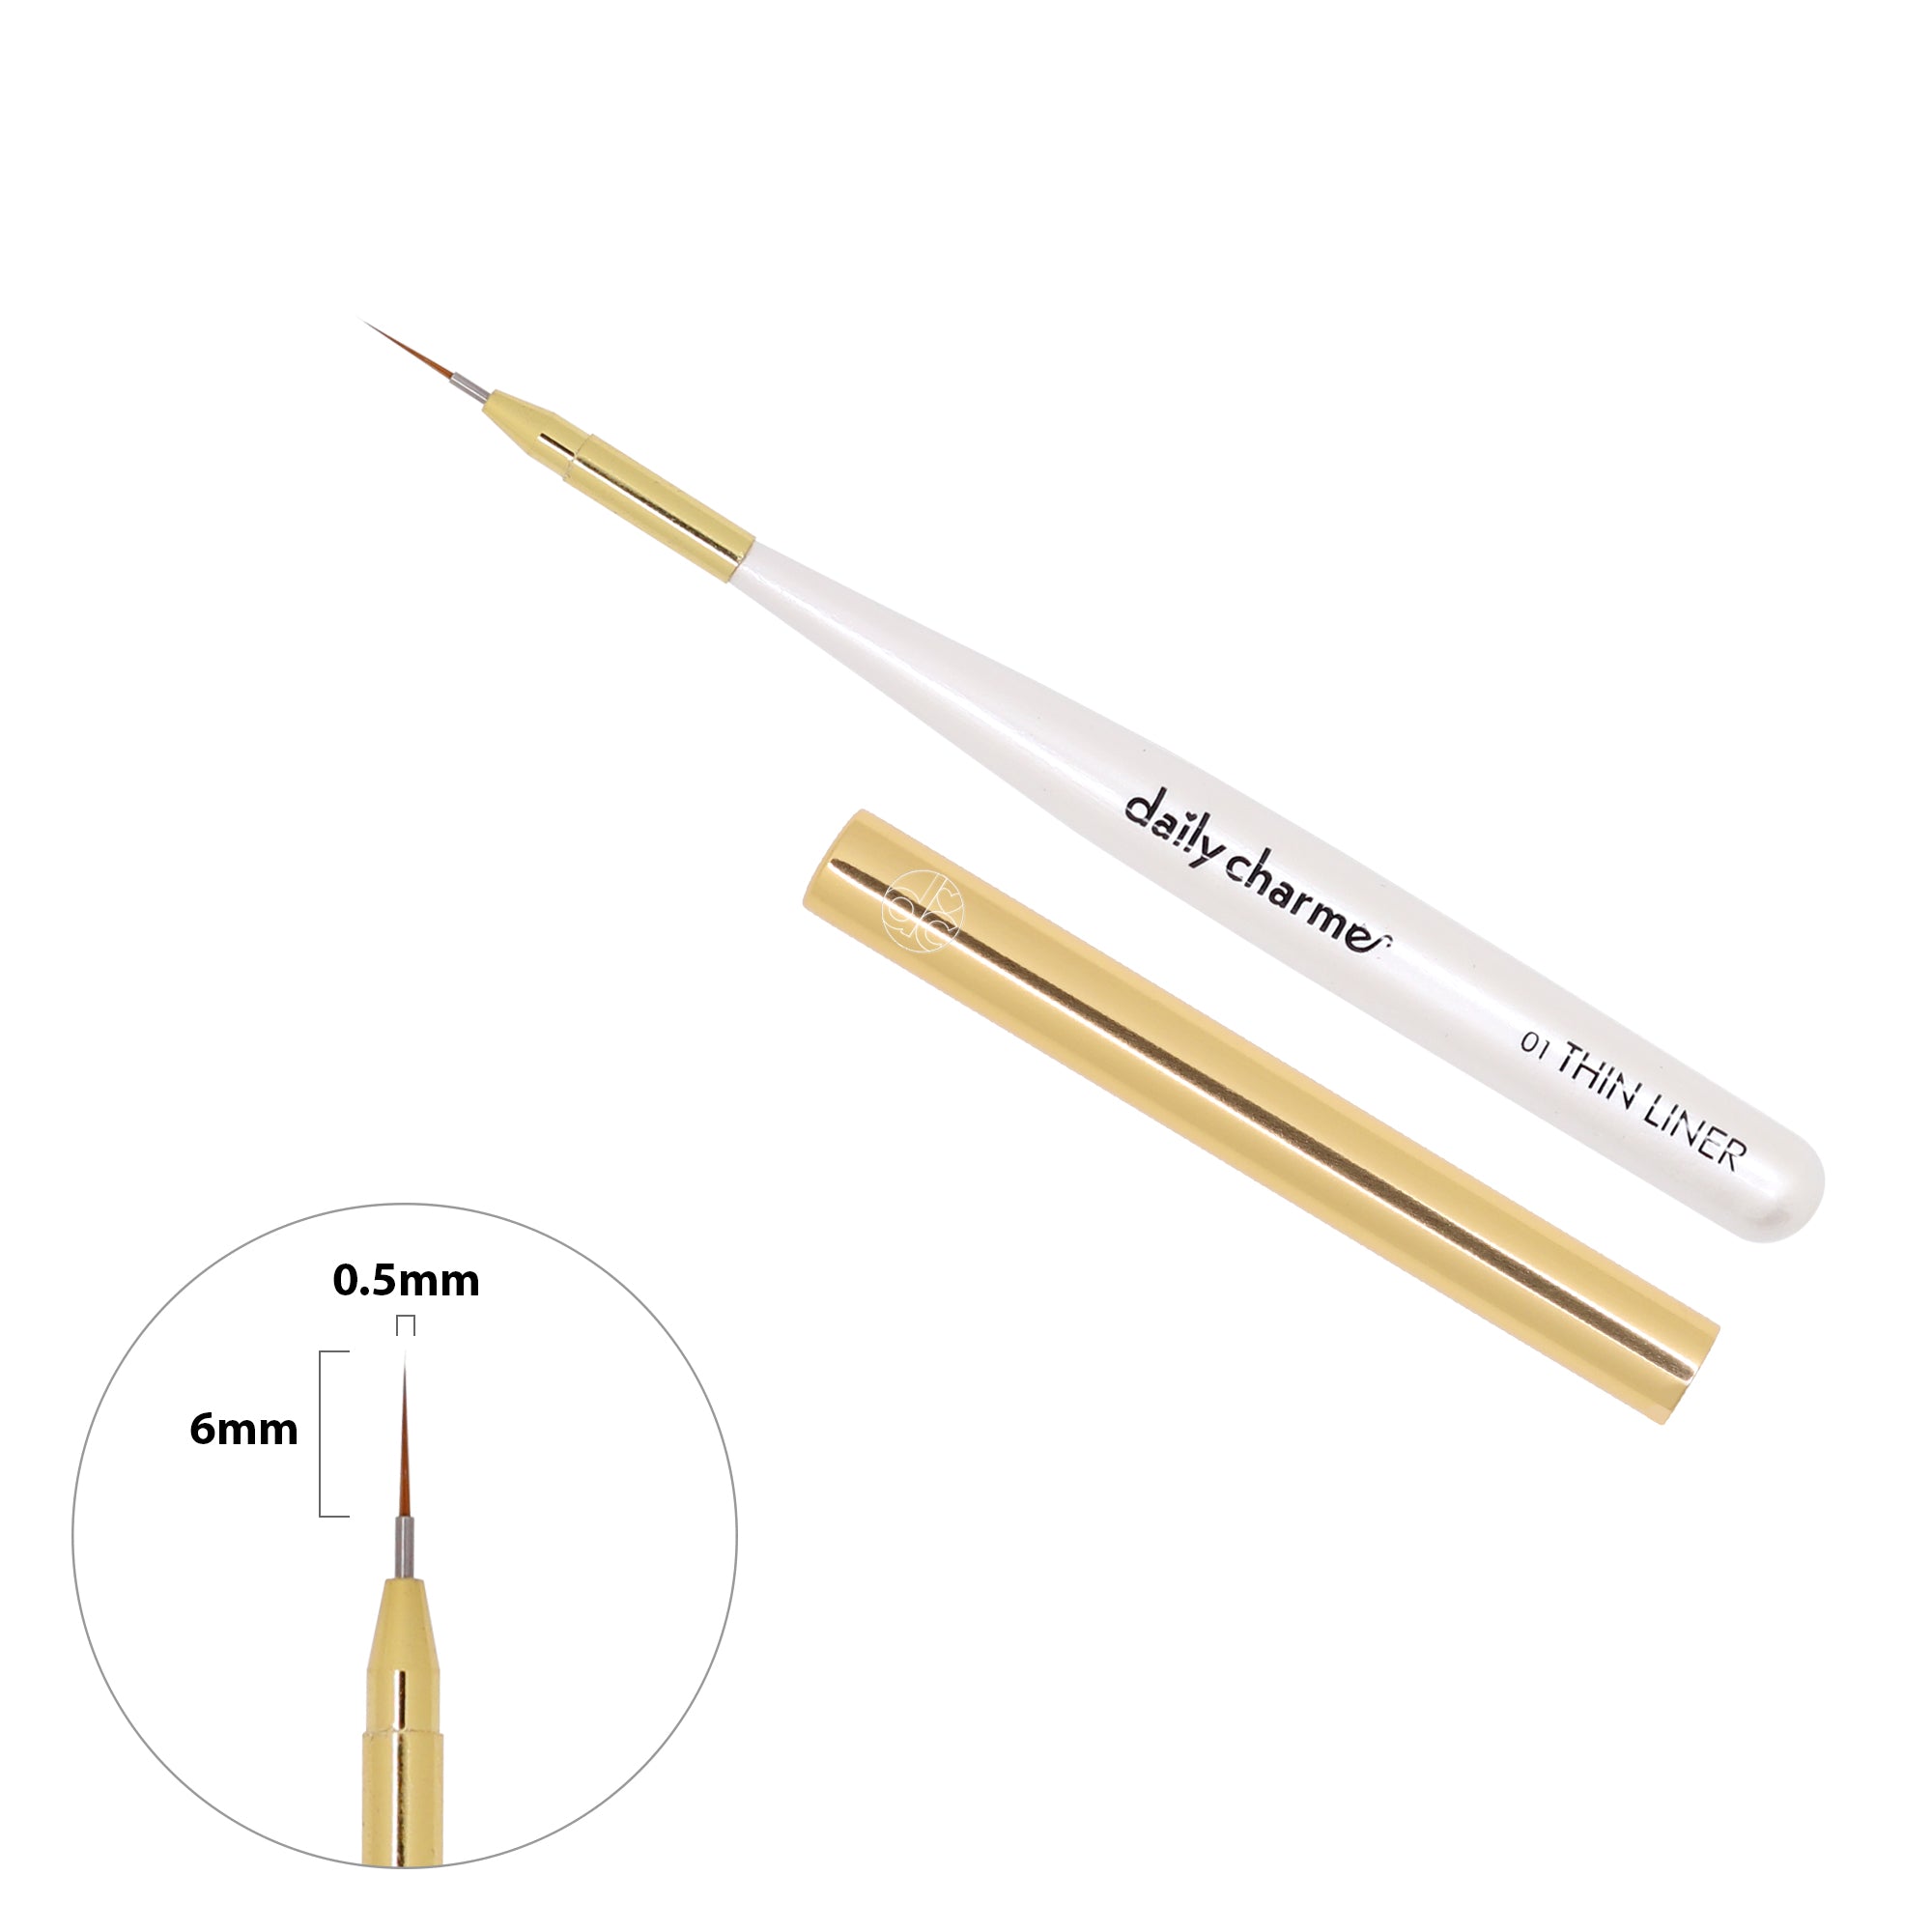 Daily Charme Nail Art Brush / 01 Thin Liner Fine Detailed Design Ornate Lace